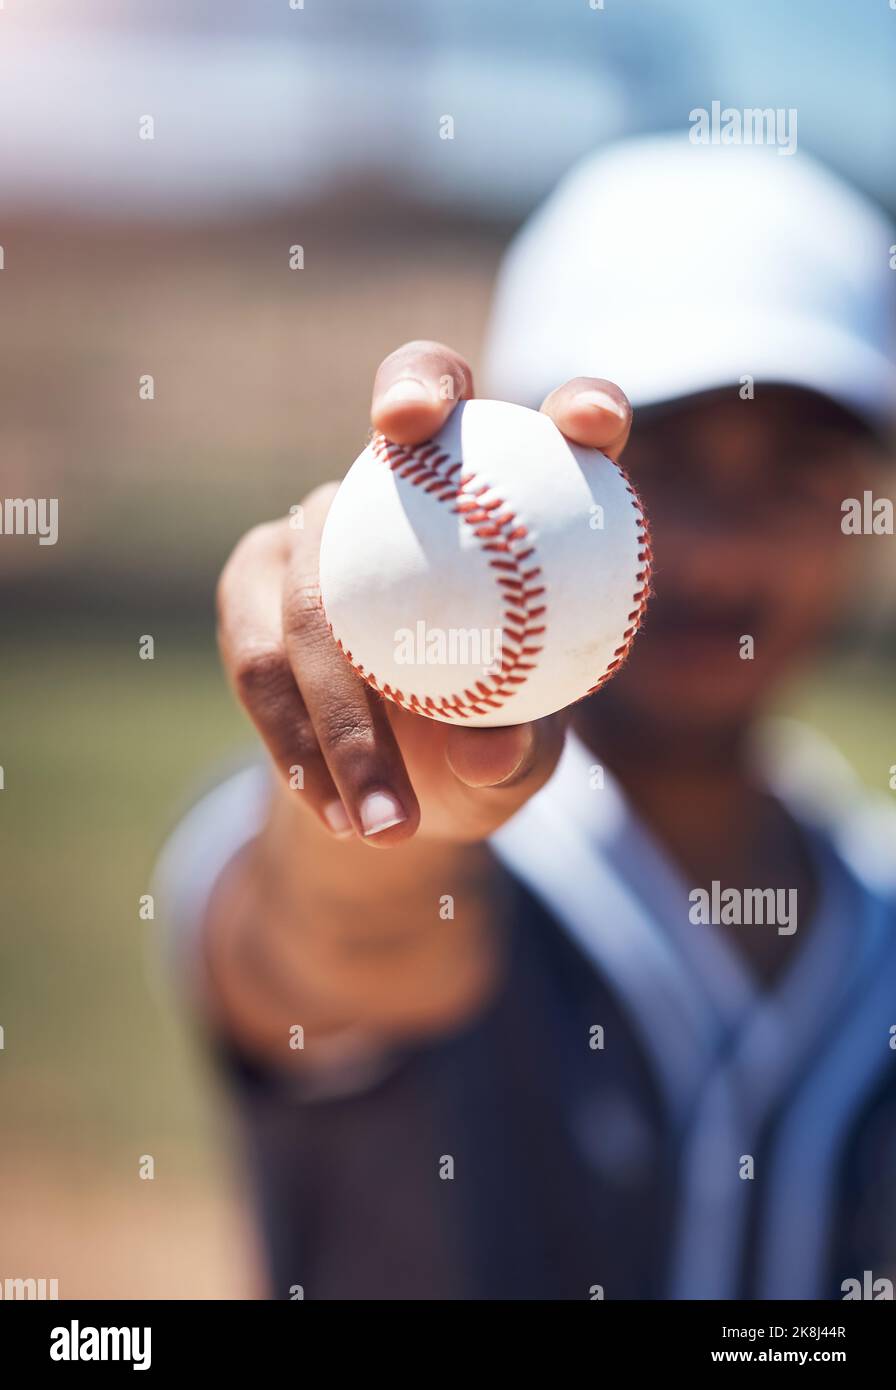 Baseball or nothing at all. a man holding a ball during a baseball match. Stock Photo